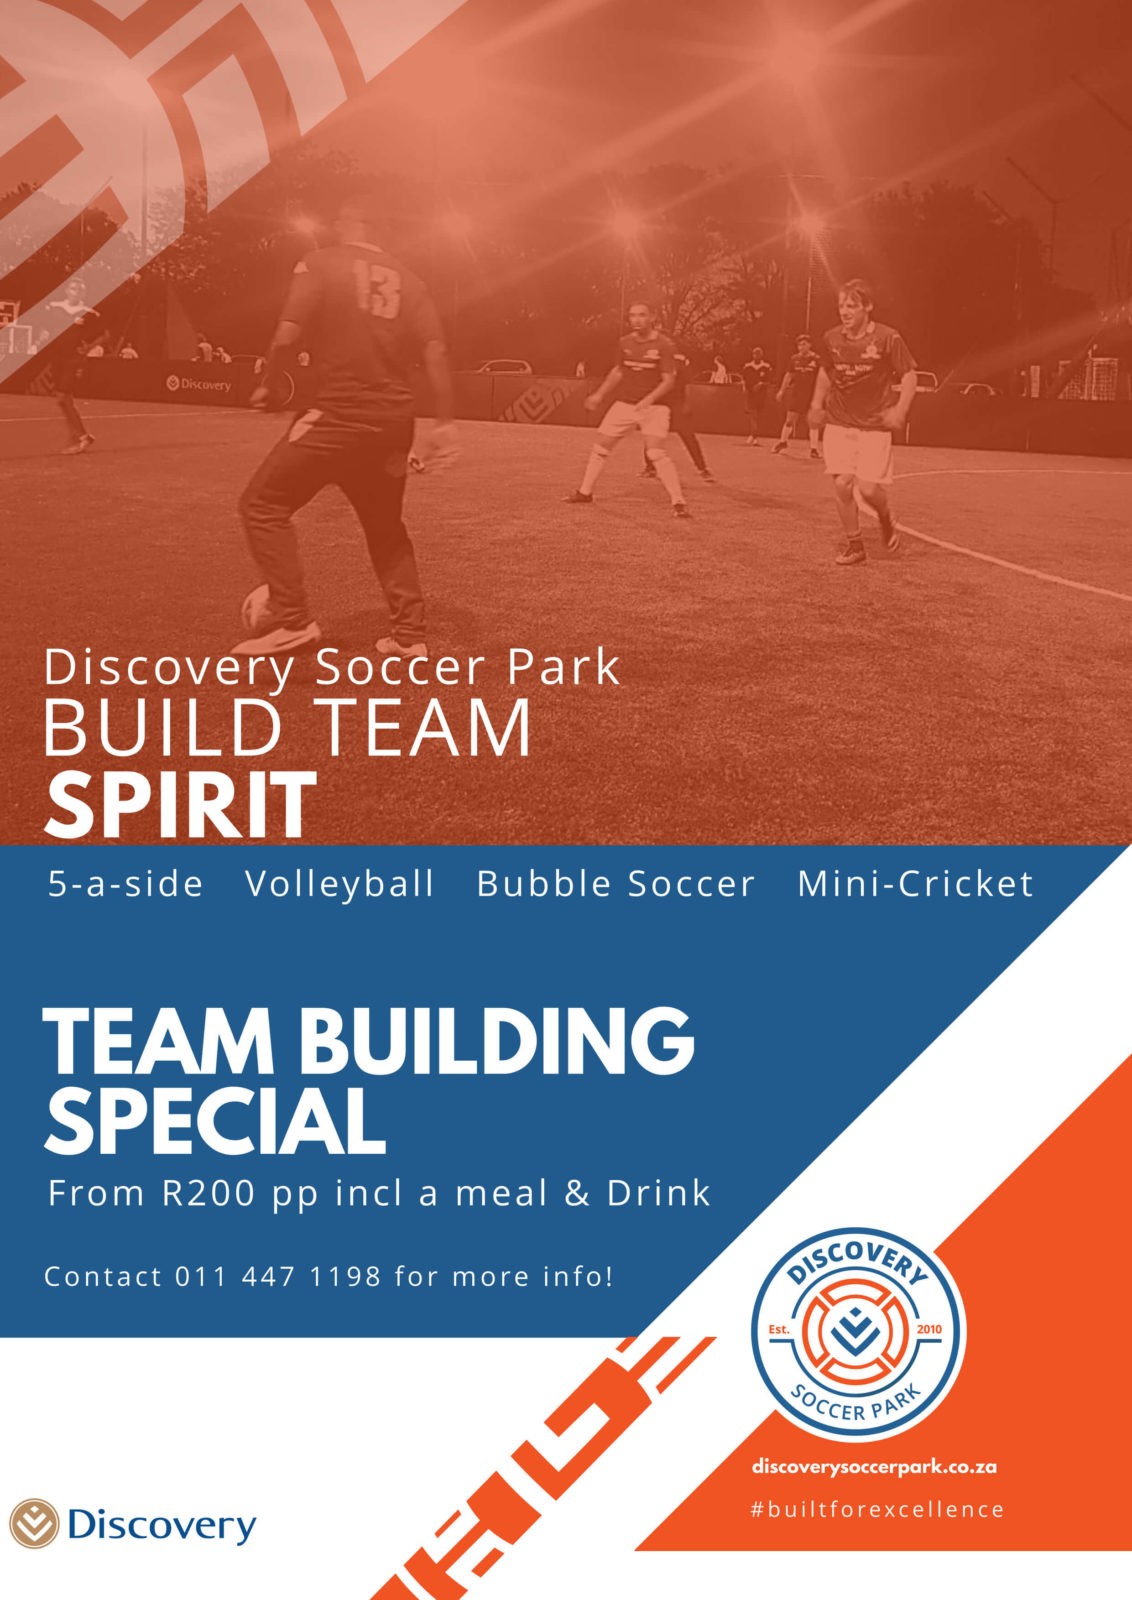 wanderers club Discovery Soccer Park News, April 2019 4